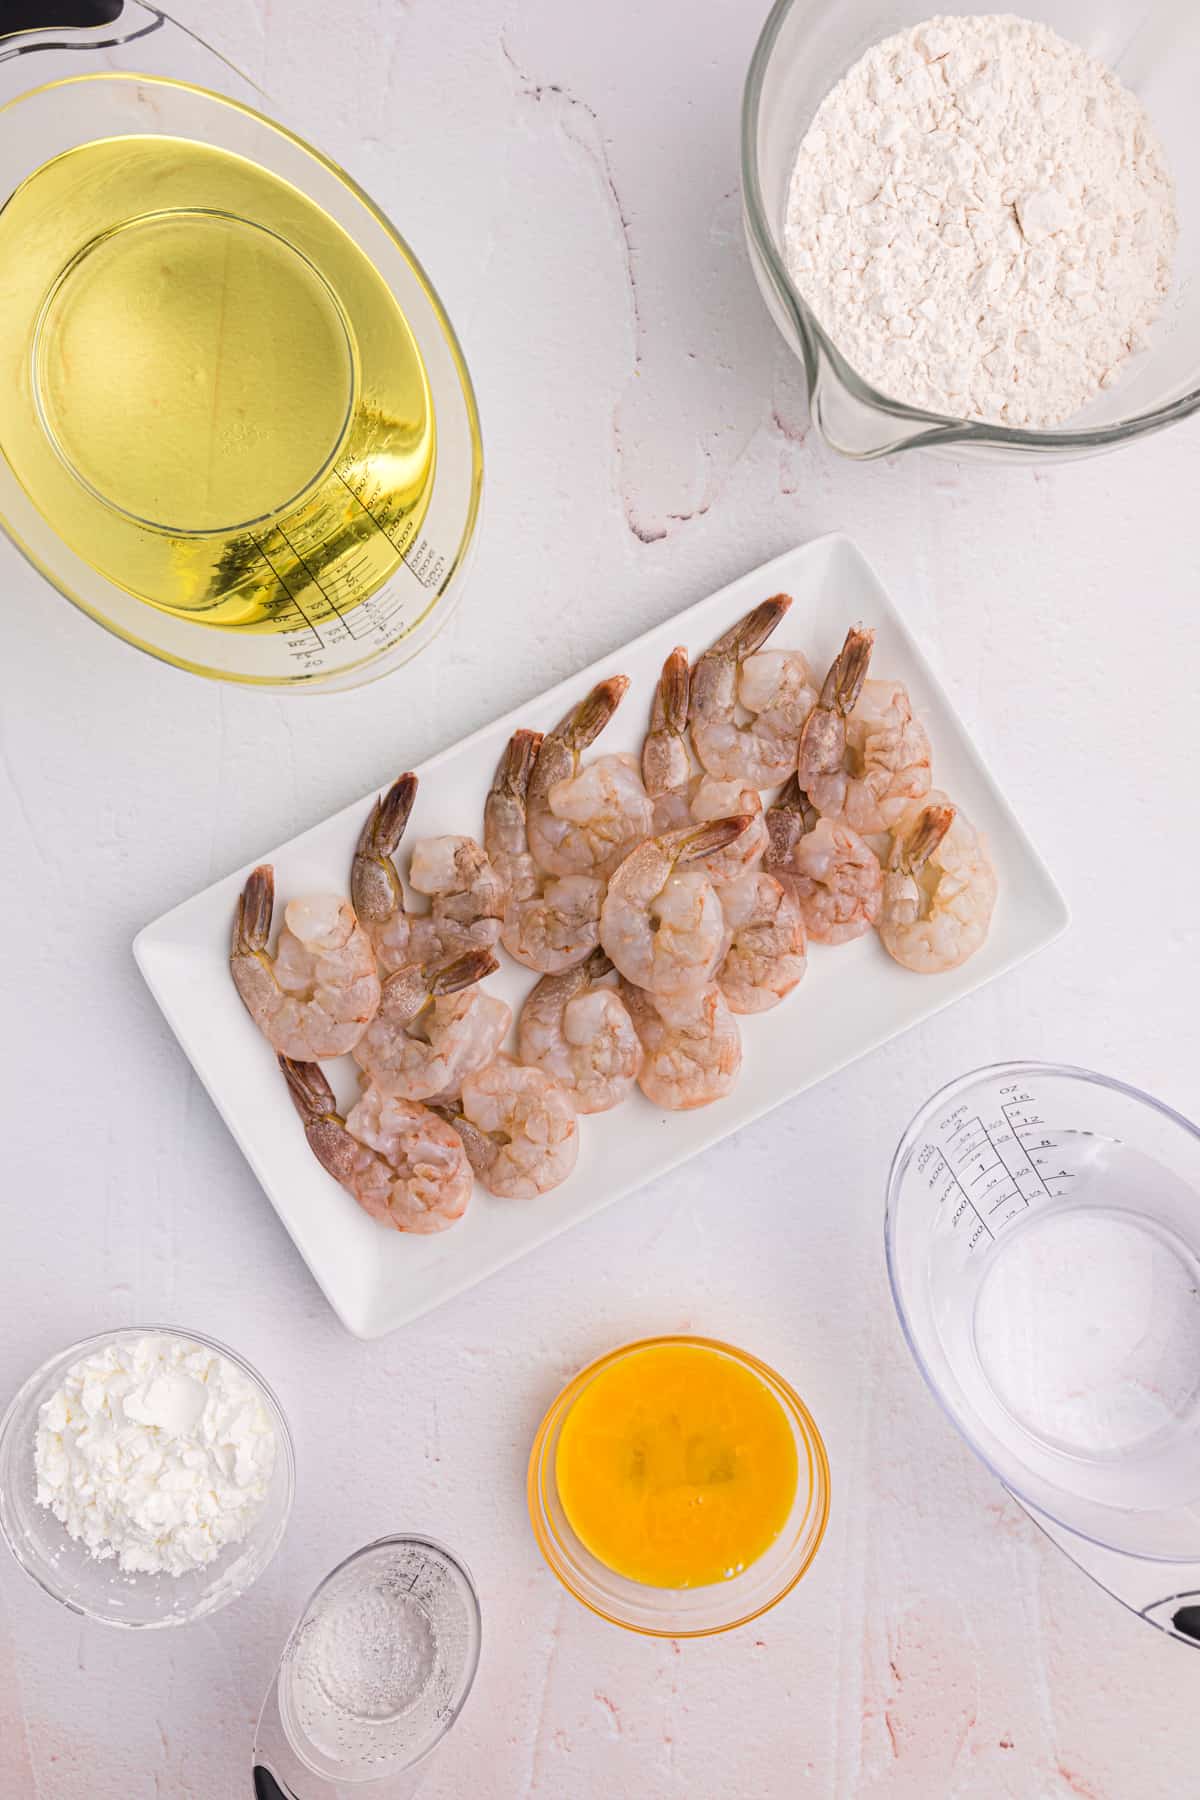 The ingredients for shrimp tempura are placed on a white surface.